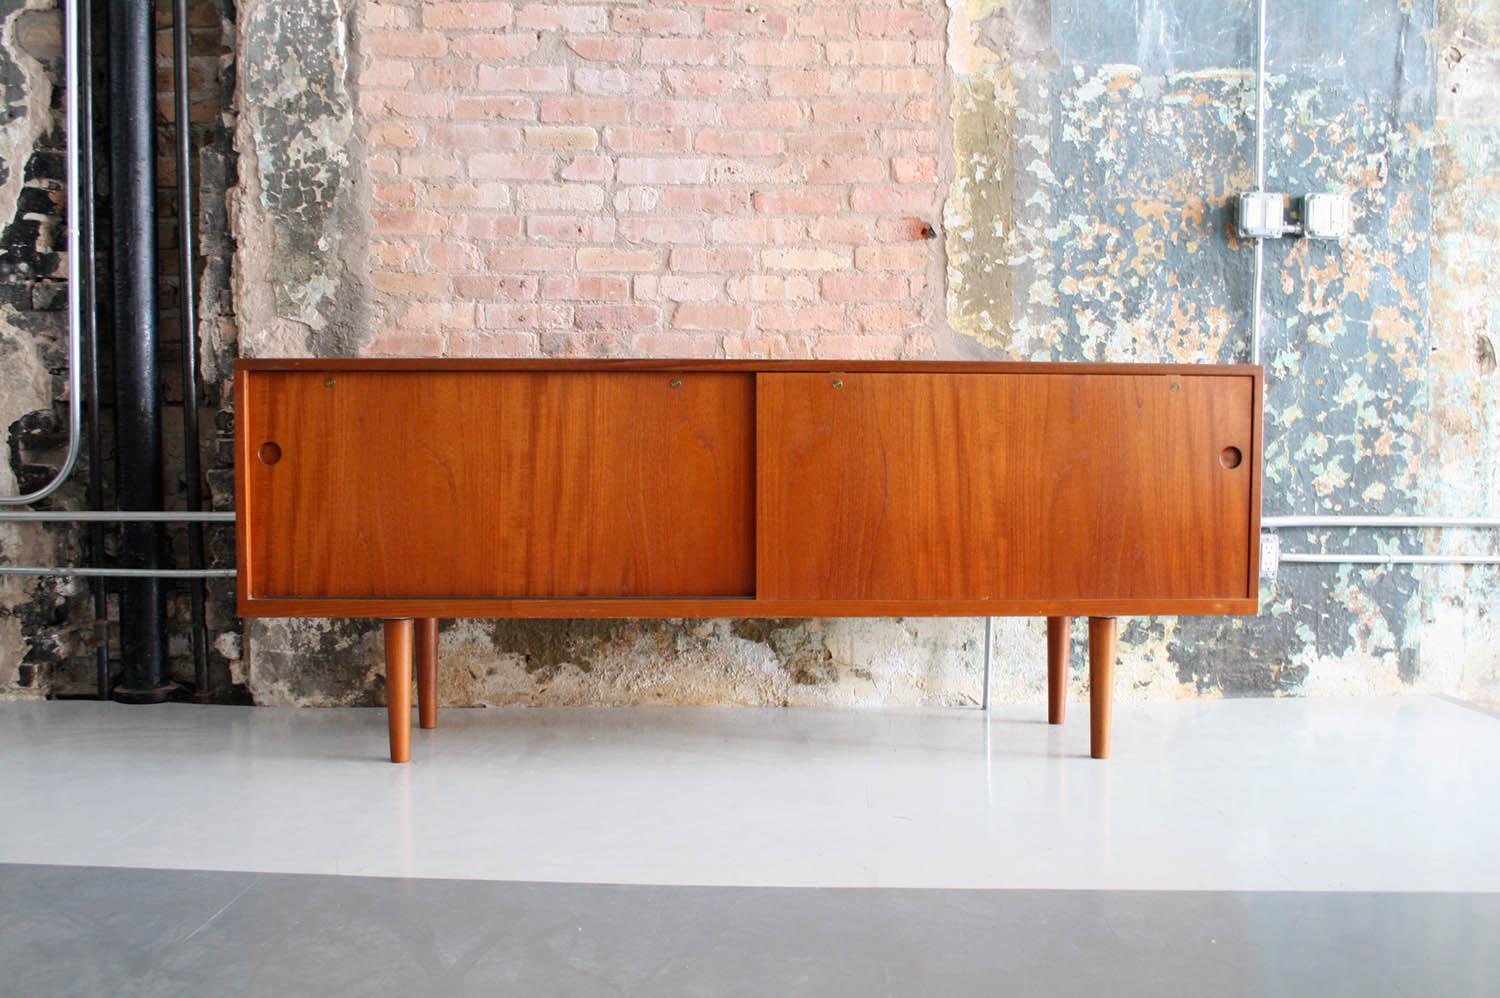 This credenza is a model 26, in oak, teak and brass, designed by Hans Wegner and produced in Denmark by Ry Mobler. The credenza features sliding doors that open to show a series of storage spaces, adjustable shelves, and drawers. The interior is